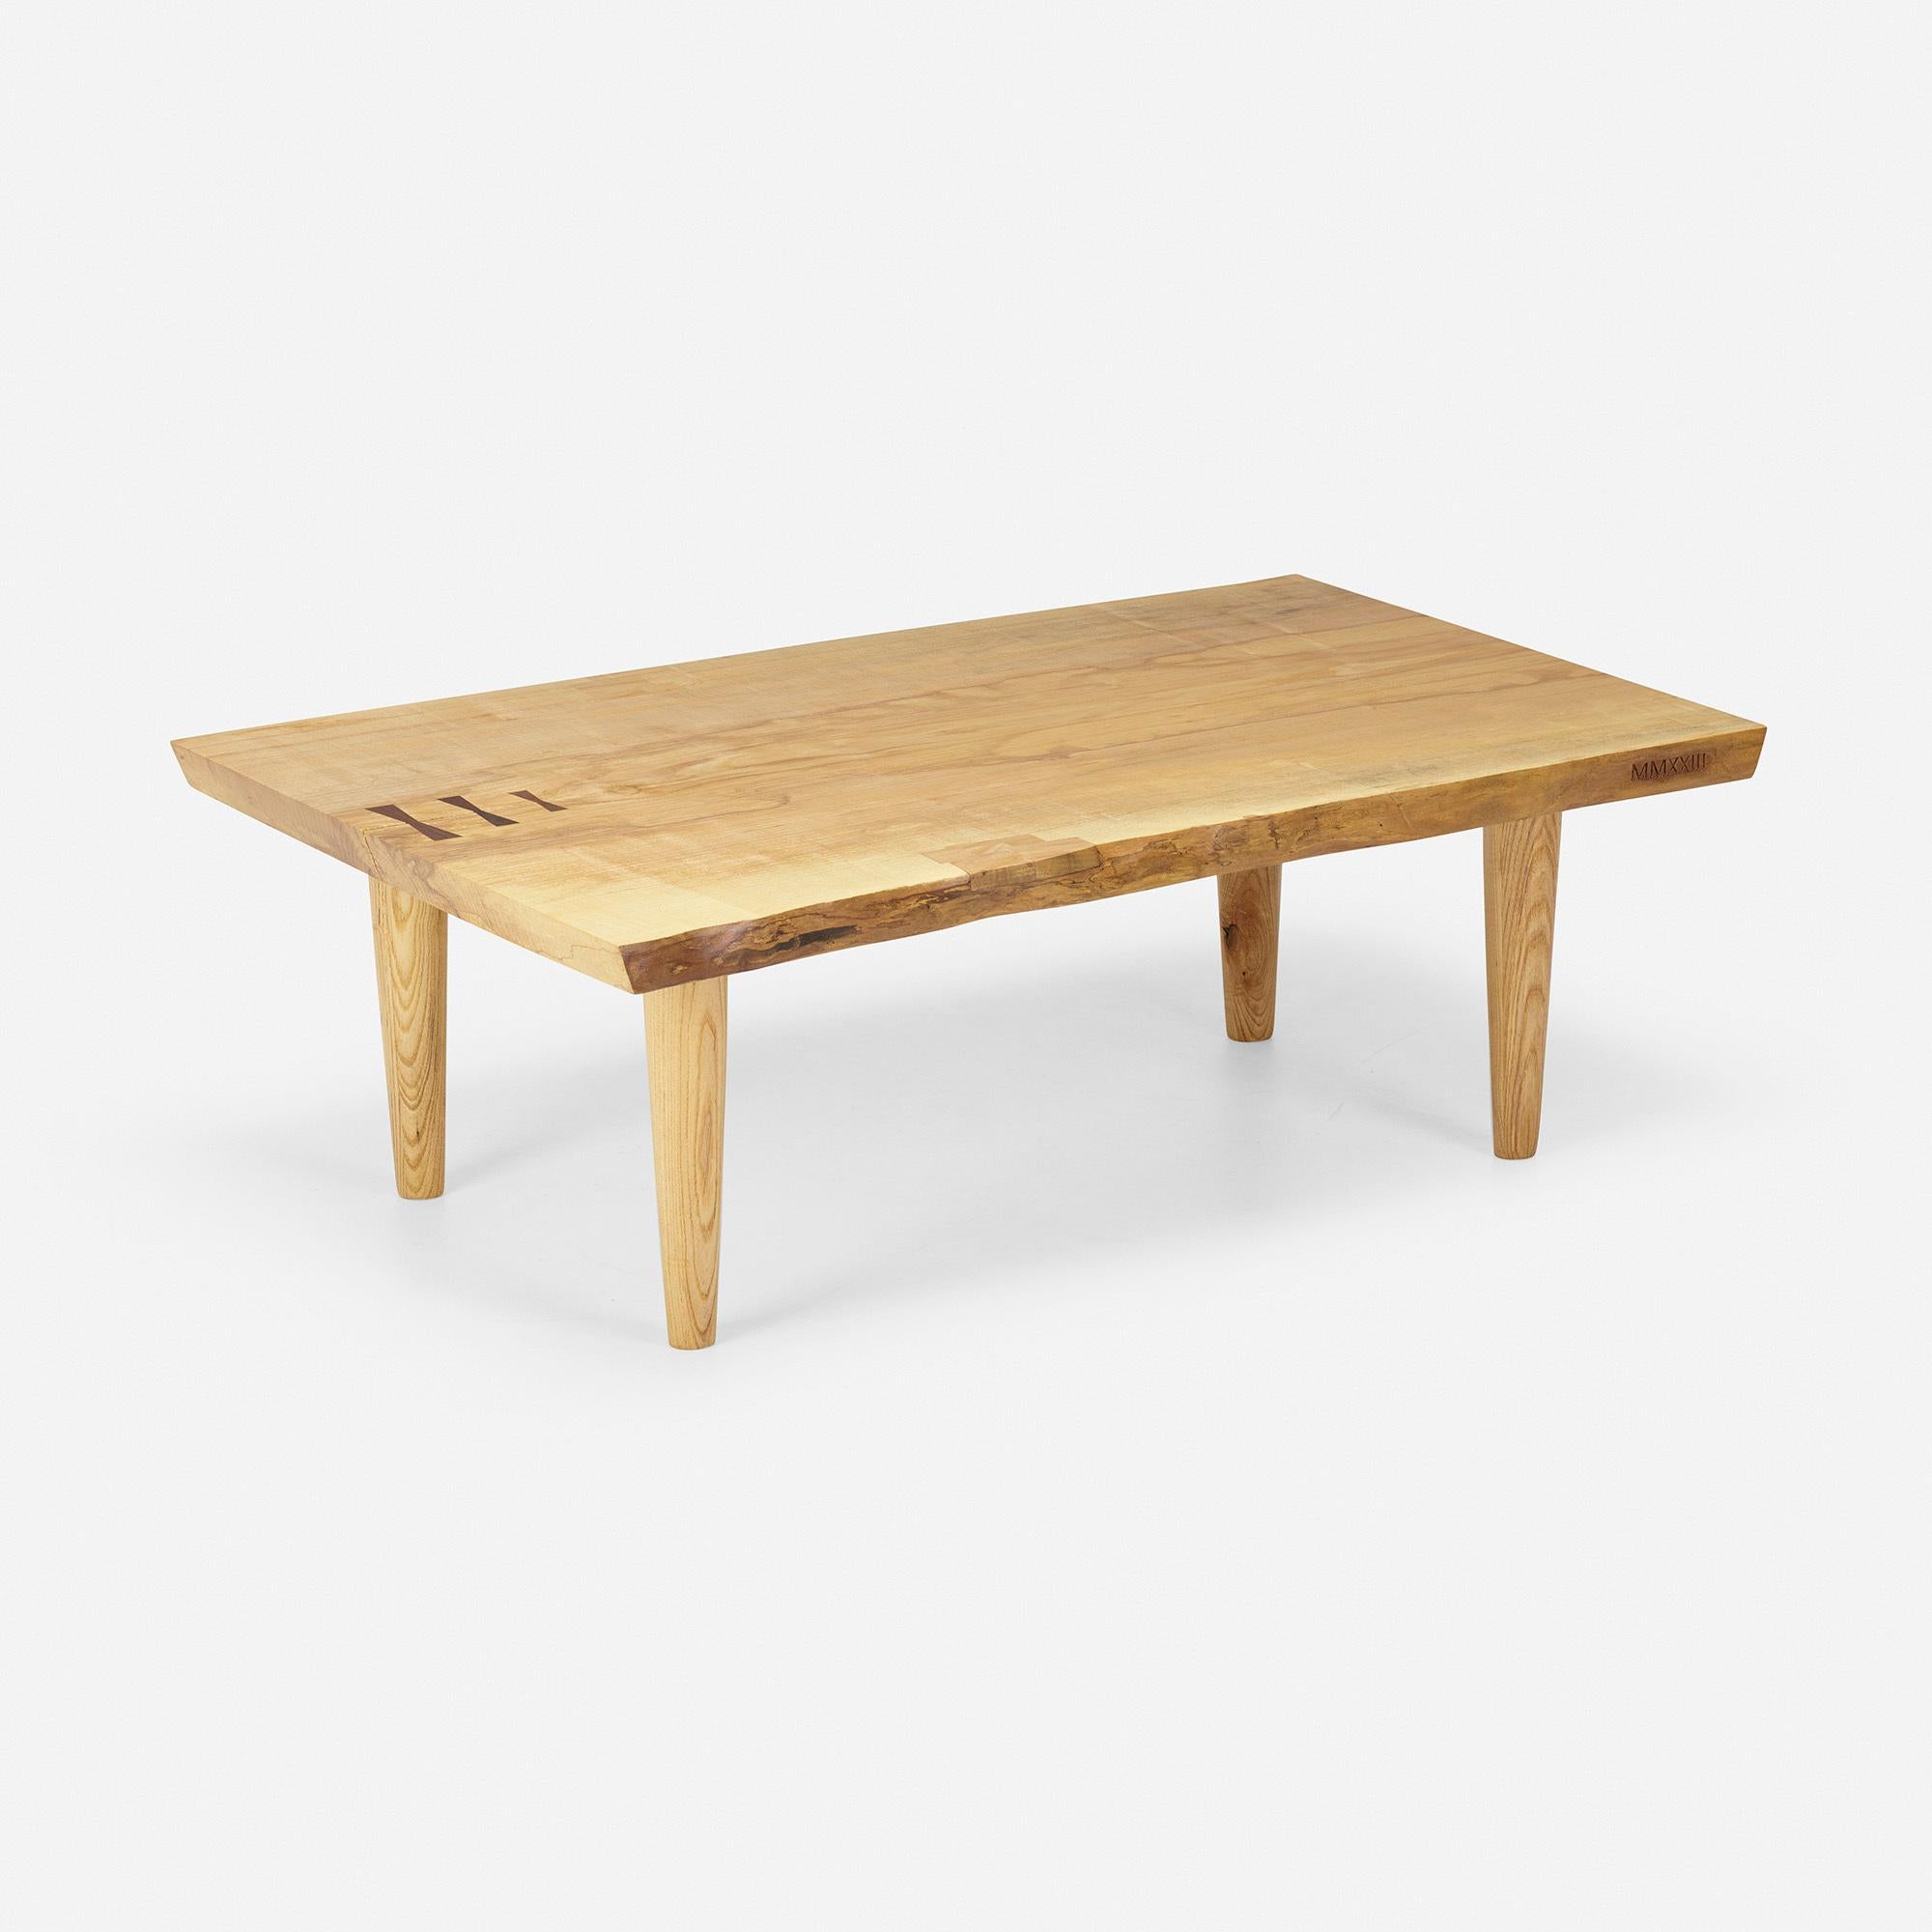 Hand crafted live edge slab coffee table. Made from highly figured wood with a variety of wood species choice. The table is designed and made by designer Michael Oates. Drawing its influence from the New Hope area and its neighboring river towns,